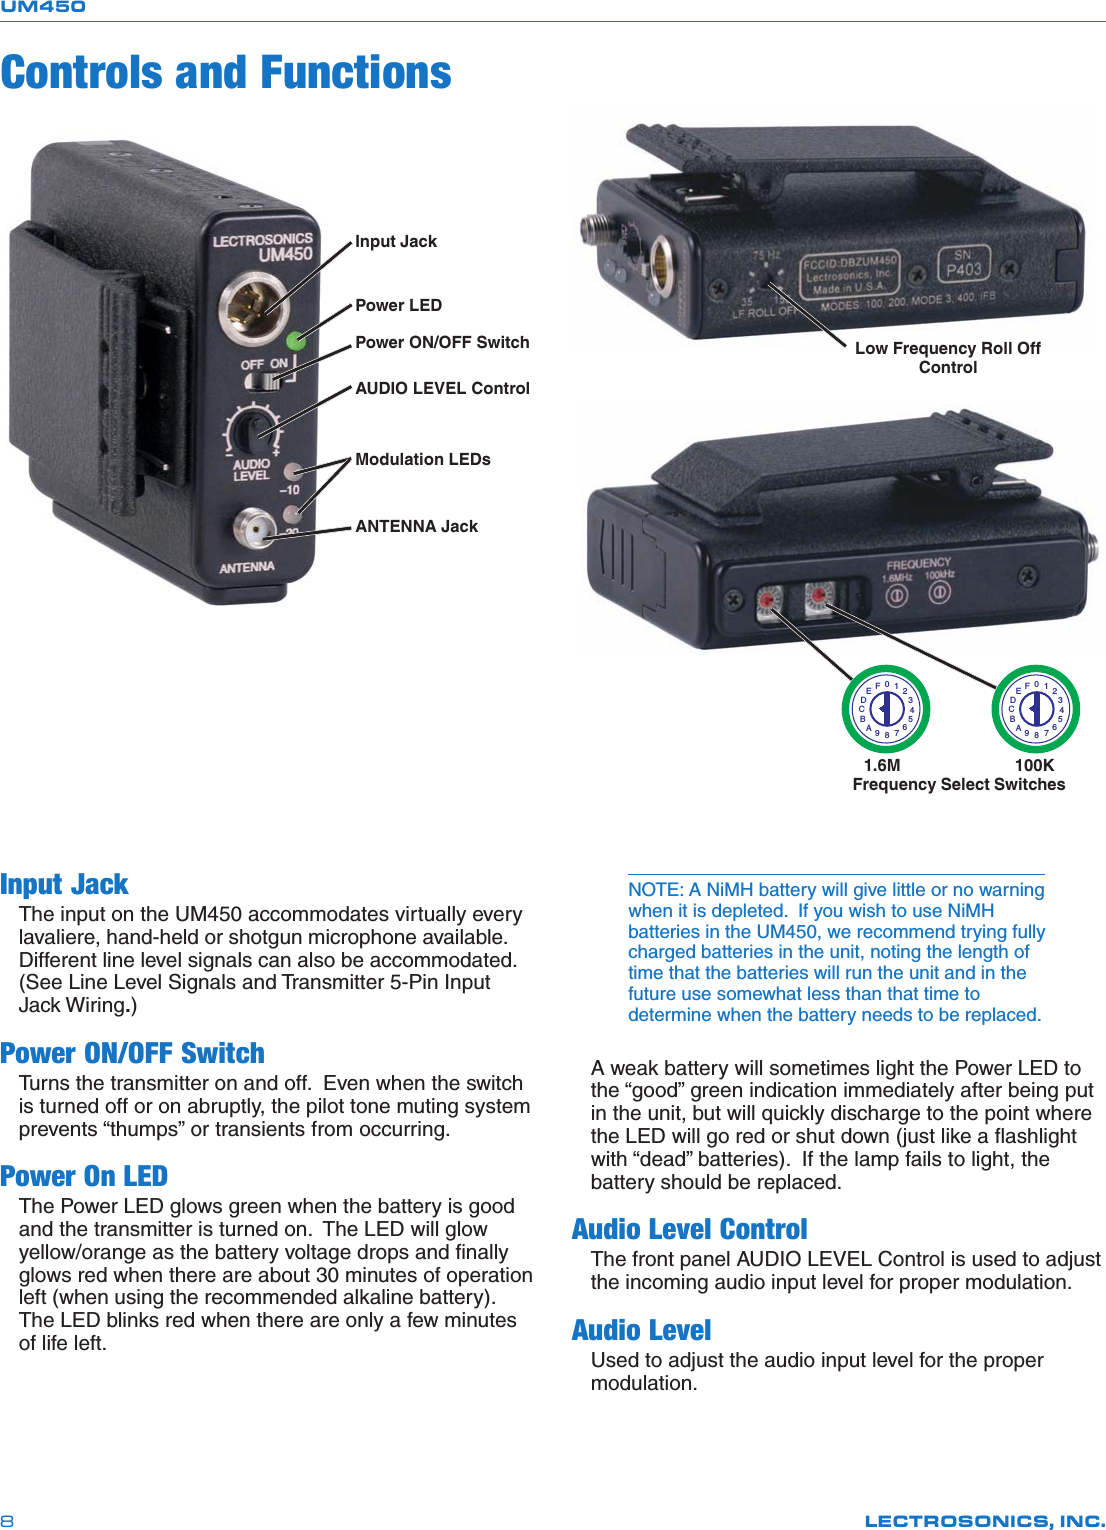 UM450LECTROSONICS, INC.8Input JackThe input on the UM450 accommodates virtually everylavaliere, hand-held or shotgun microphone available.Different line level signals can also be accommodated.(See Line Level Signals and Transmitter 5-Pin InputJack Wiring.)Power ON/OFF SwitchTurns the transmitter on and off.  Even when the switchis turned off or on abruptly, the pilot tone muting systemprevents “thumps” or transients from occurring.Power On LEDThe Power LED glows green when the battery is goodand the transmitter is turned on.  The LED will glowyellow/orange as the battery voltage drops and finallyglows red when there are about 30 minutes of operationleft (when using the recommended alkaline battery).The LED blinks red when there are only a few minutesof life left.Input JackPower ON/OFF SwitchAUDIO LEVEL ControlModulation LEDsANTENNA JackPower LED1.6M                         100KFrequency Select Switches0123456789ABCDEF0123456789ABCDEFLow Frequency Roll OffControlControls and FunctionsNOTE: A NiMH battery will give little or no warningwhen it is depleted.  If you wish to use NiMHbatteries in the UM450, we recommend trying fullycharged batteries in the unit, noting the length oftime that the batteries will run the unit and in thefuture use somewhat less than that time todetermine when the battery needs to be replaced.A weak battery will sometimes light the Power LED tothe “good” green indication immediately after being putin the unit, but will quickly discharge to the point wherethe LED will go red or shut down (just like a flashlightwith “dead” batteries).  If the lamp fails to light, thebattery should be replaced.Audio Level ControlThe front panel AUDIO LEVEL Control is used to adjustthe incoming audio input level for proper modulation.Audio LevelUsed to adjust the audio input level for the propermodulation.